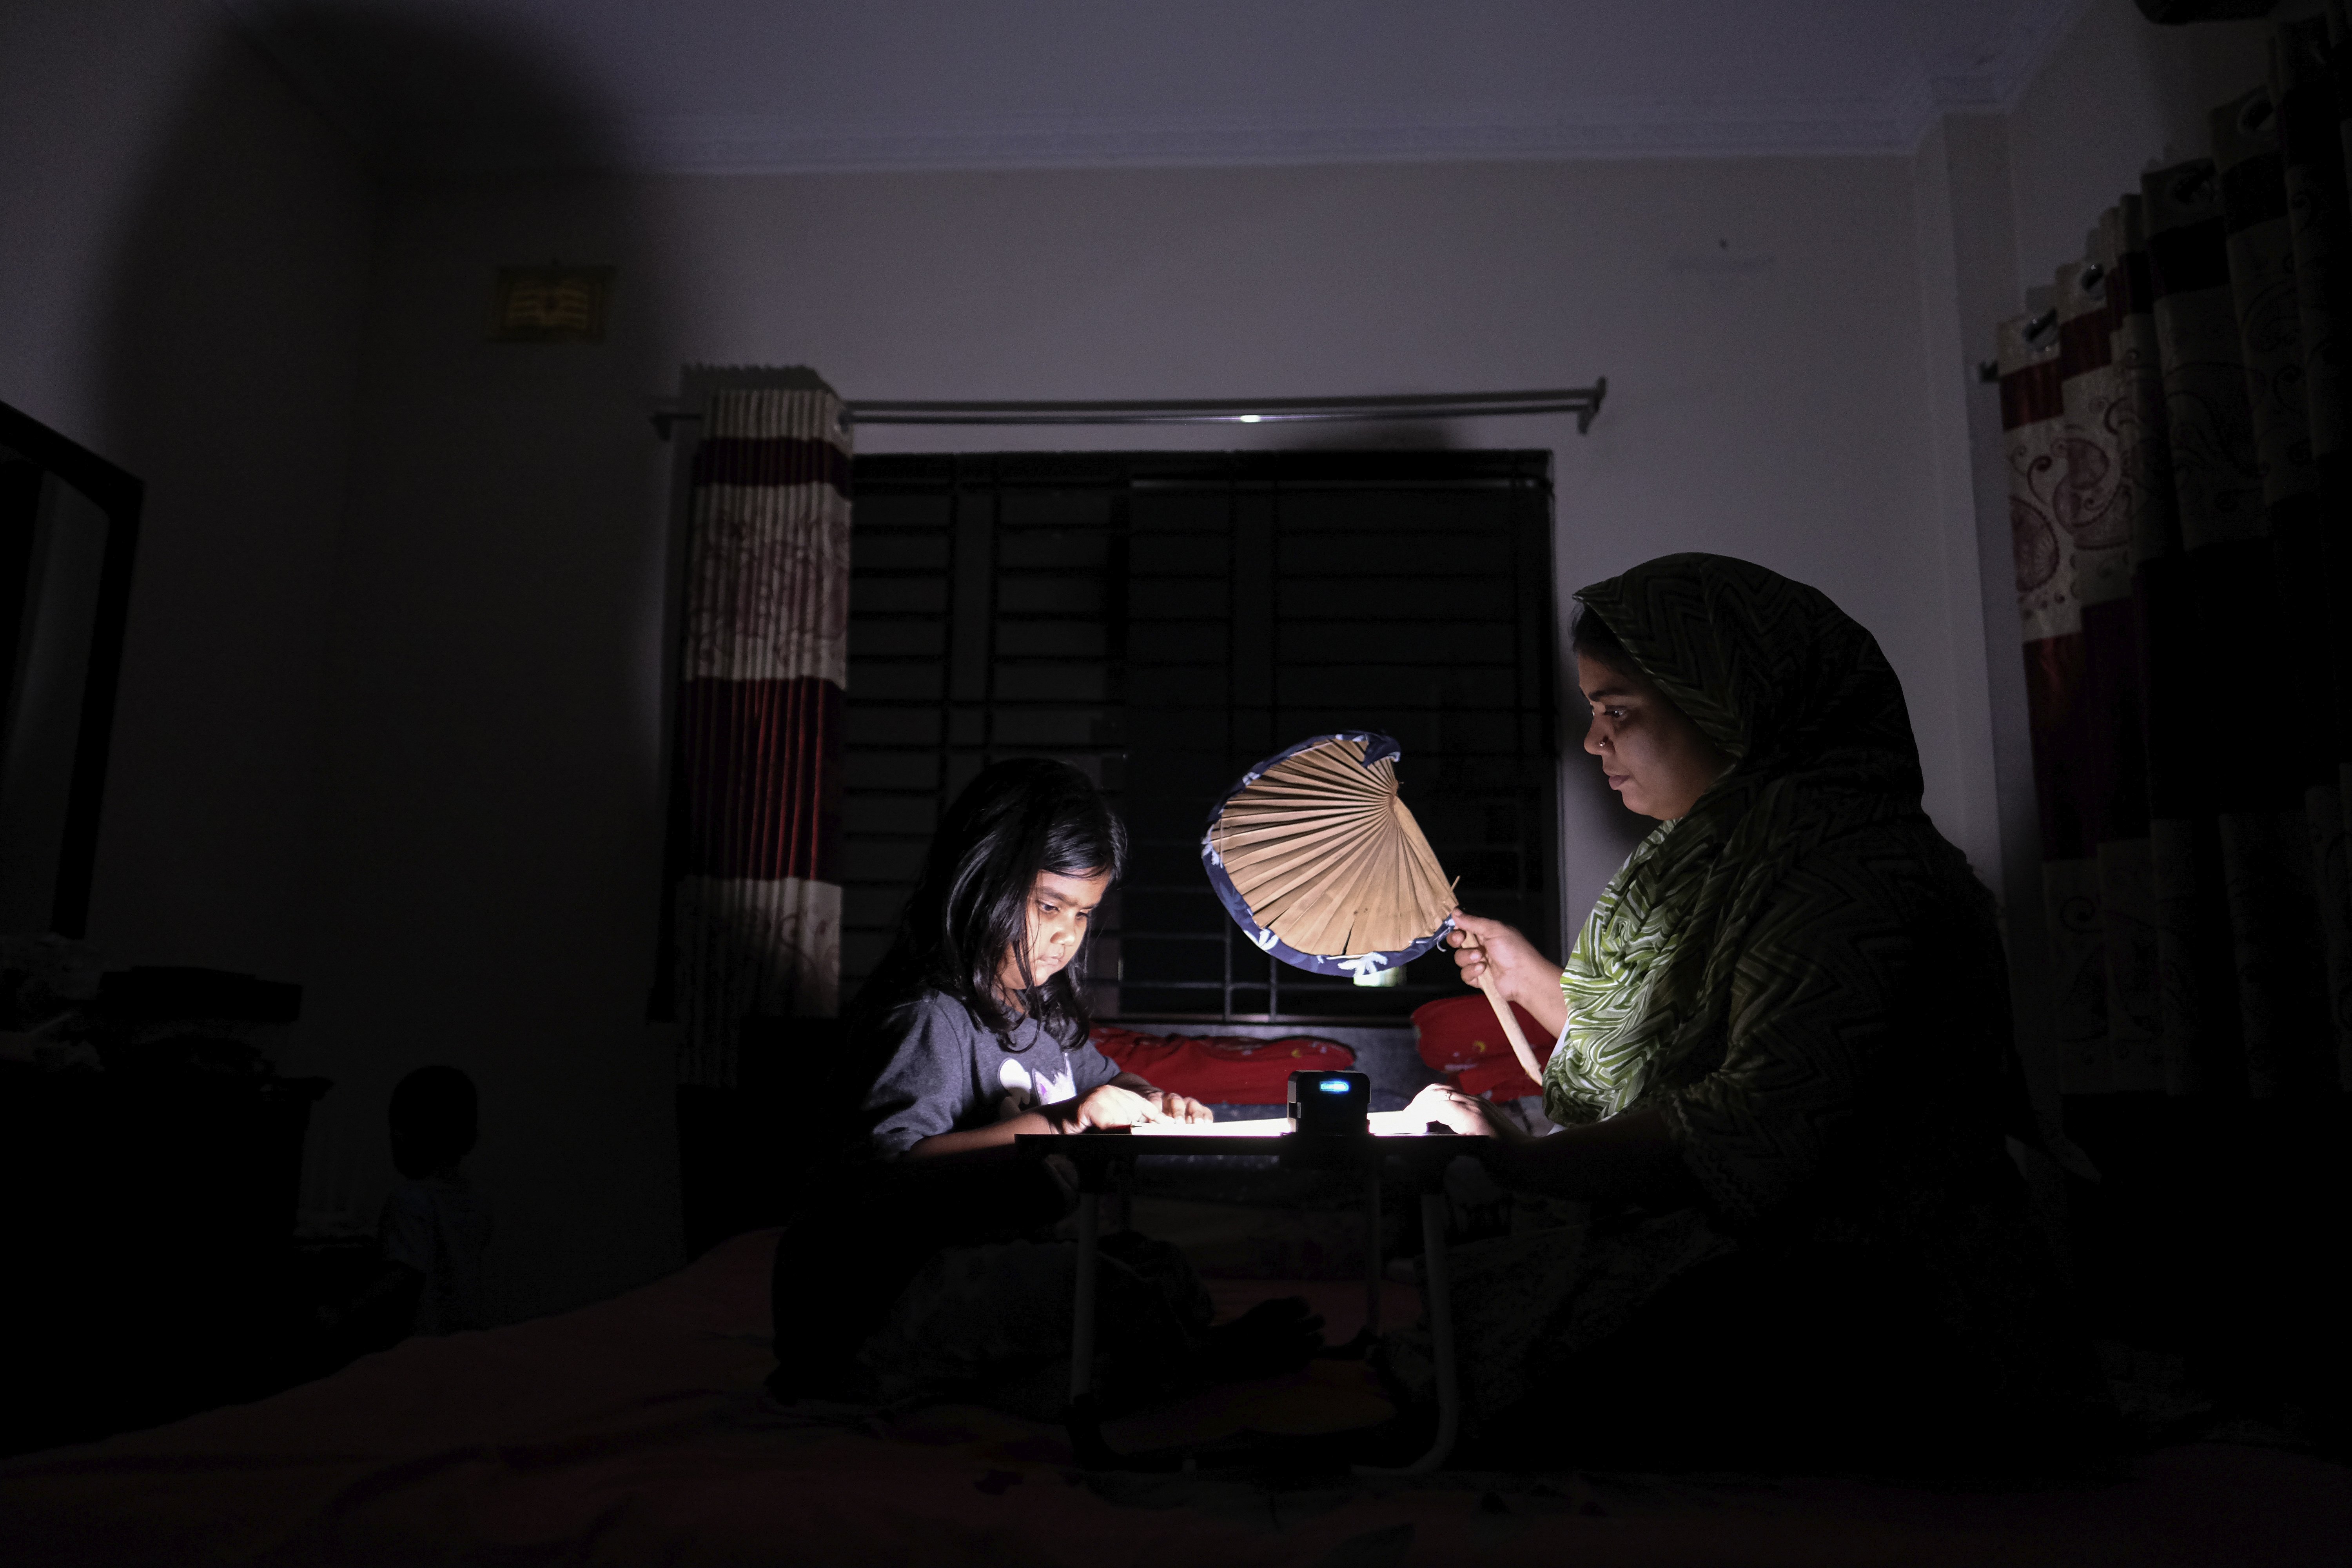 A Bangladeshi woman uses a traditional hand fan as she assists her daughter in her studies during a power cut at their home in Pilkhana area, Dhaka, Bangladesh, Aug. 23, 2022. (AP Photo/Mahmud Hossain Opu)